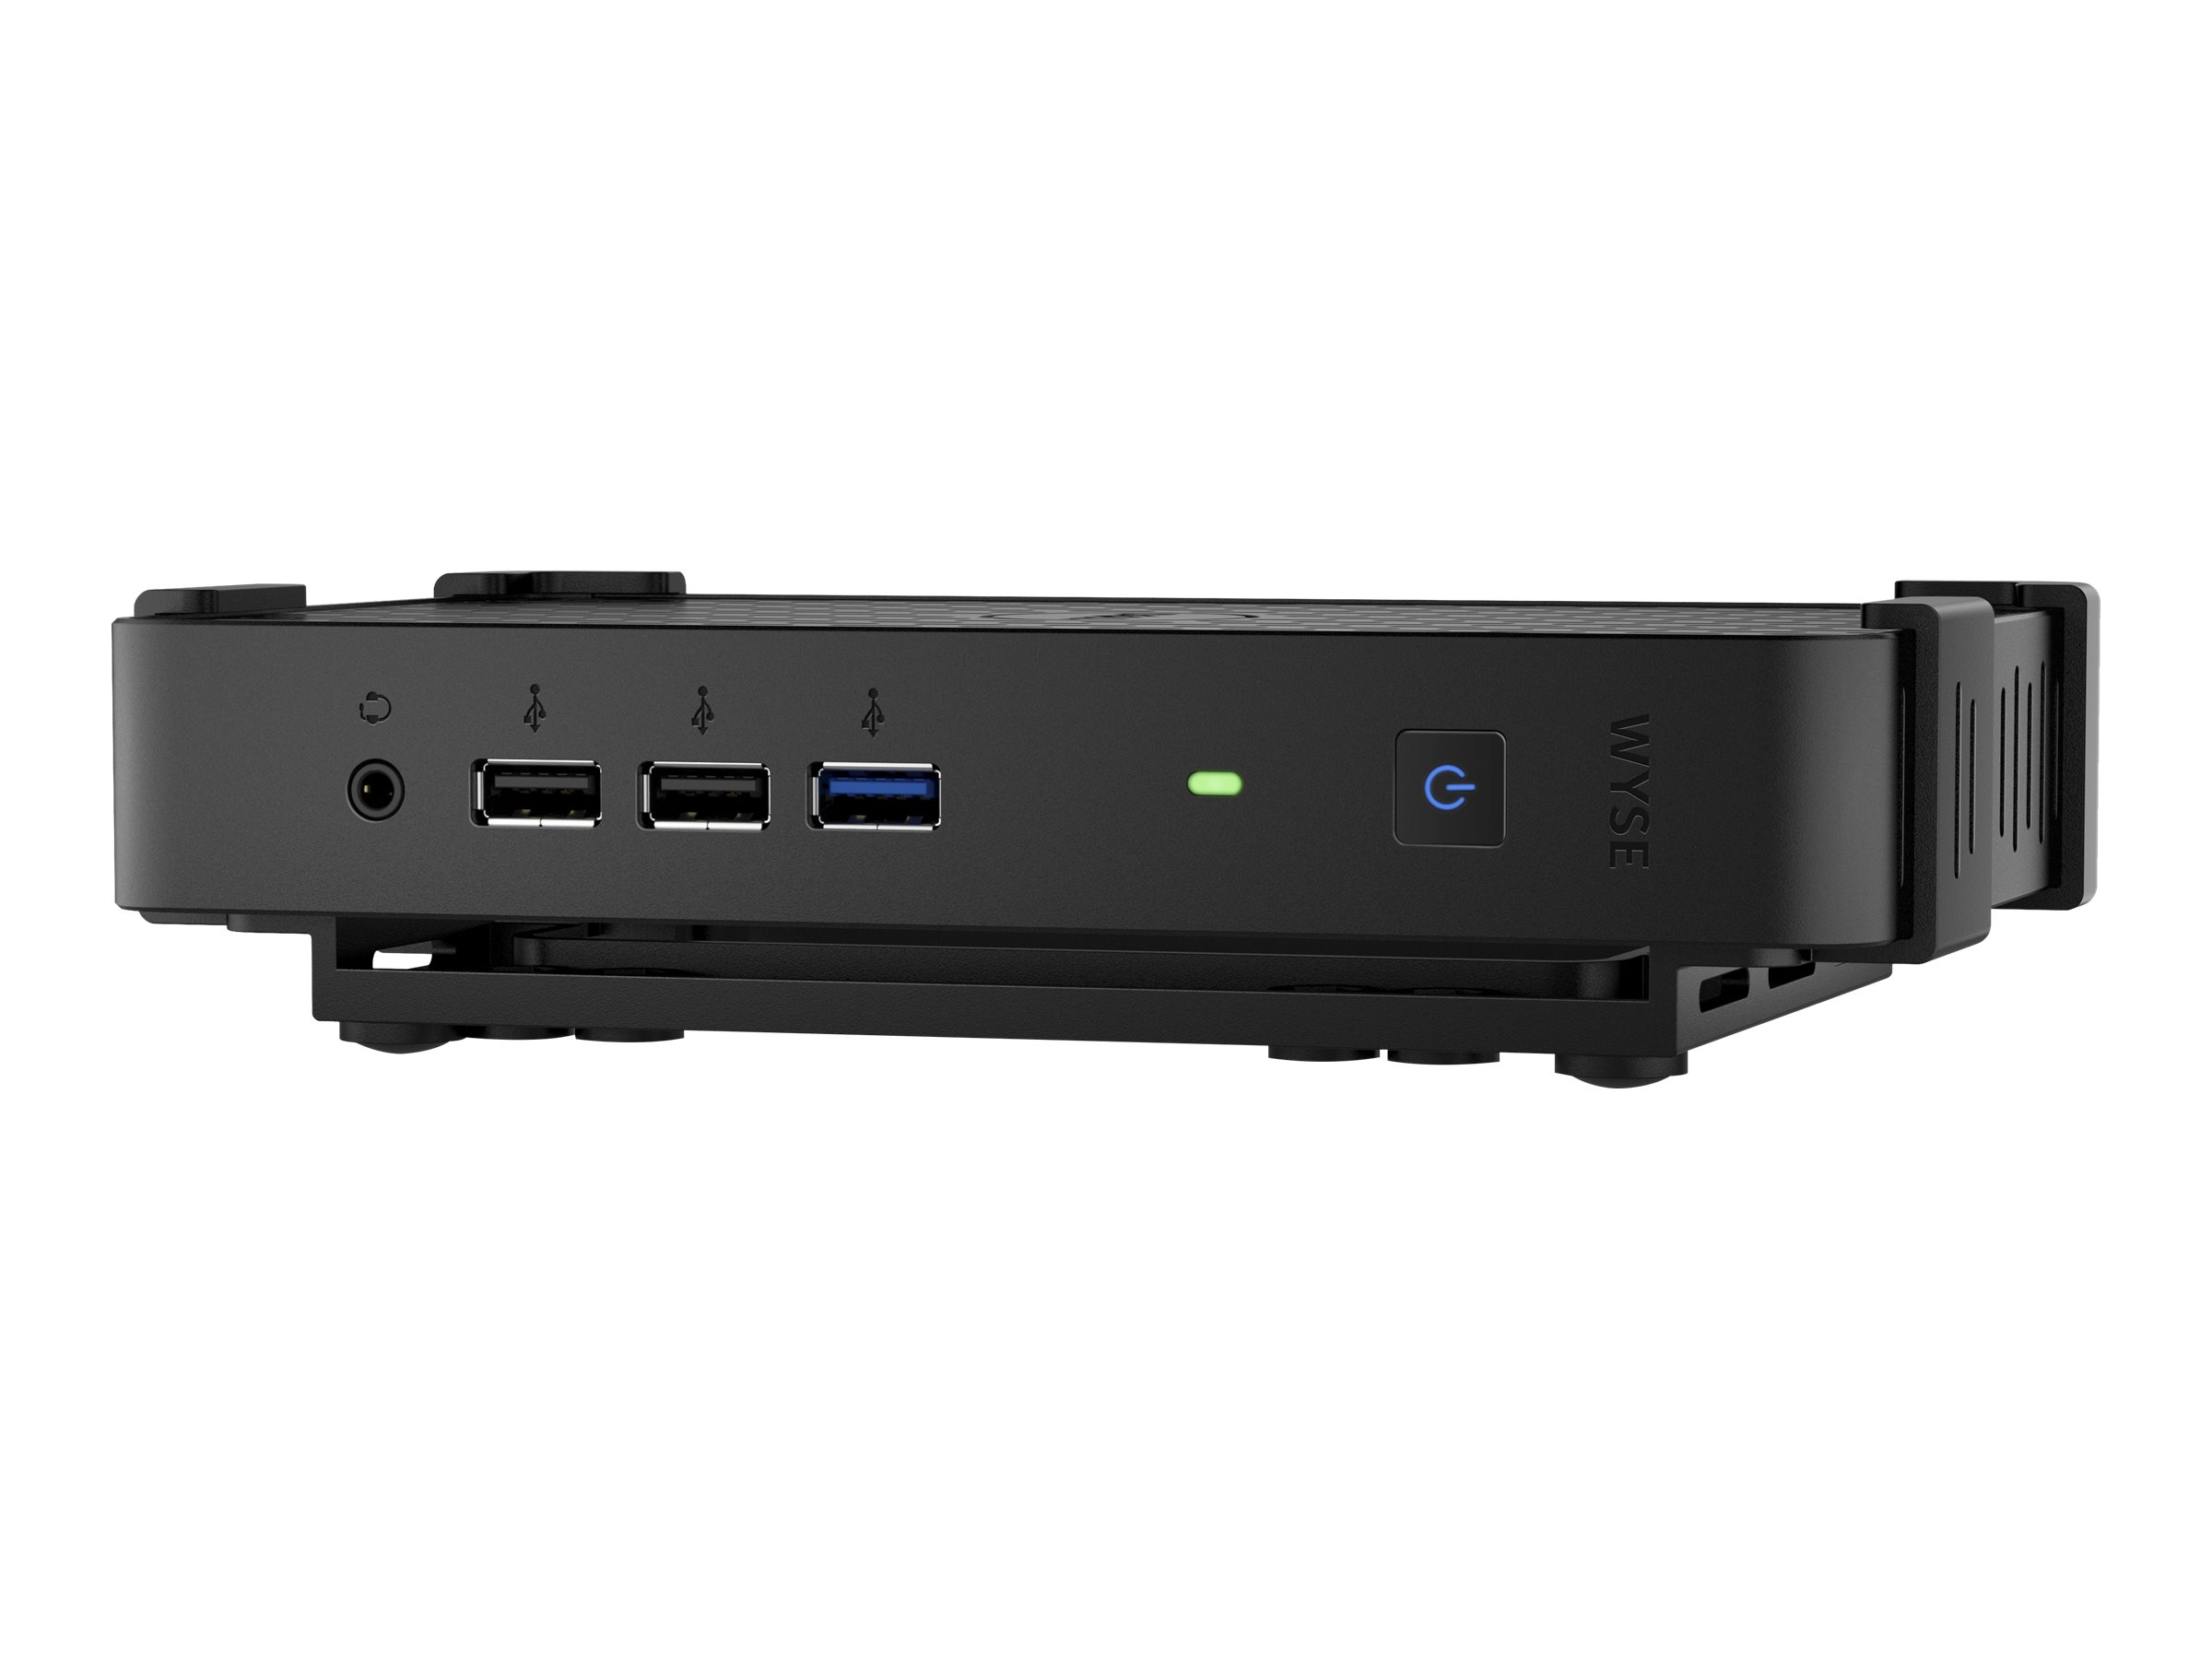 Dell Wyse 3030 - Thin client